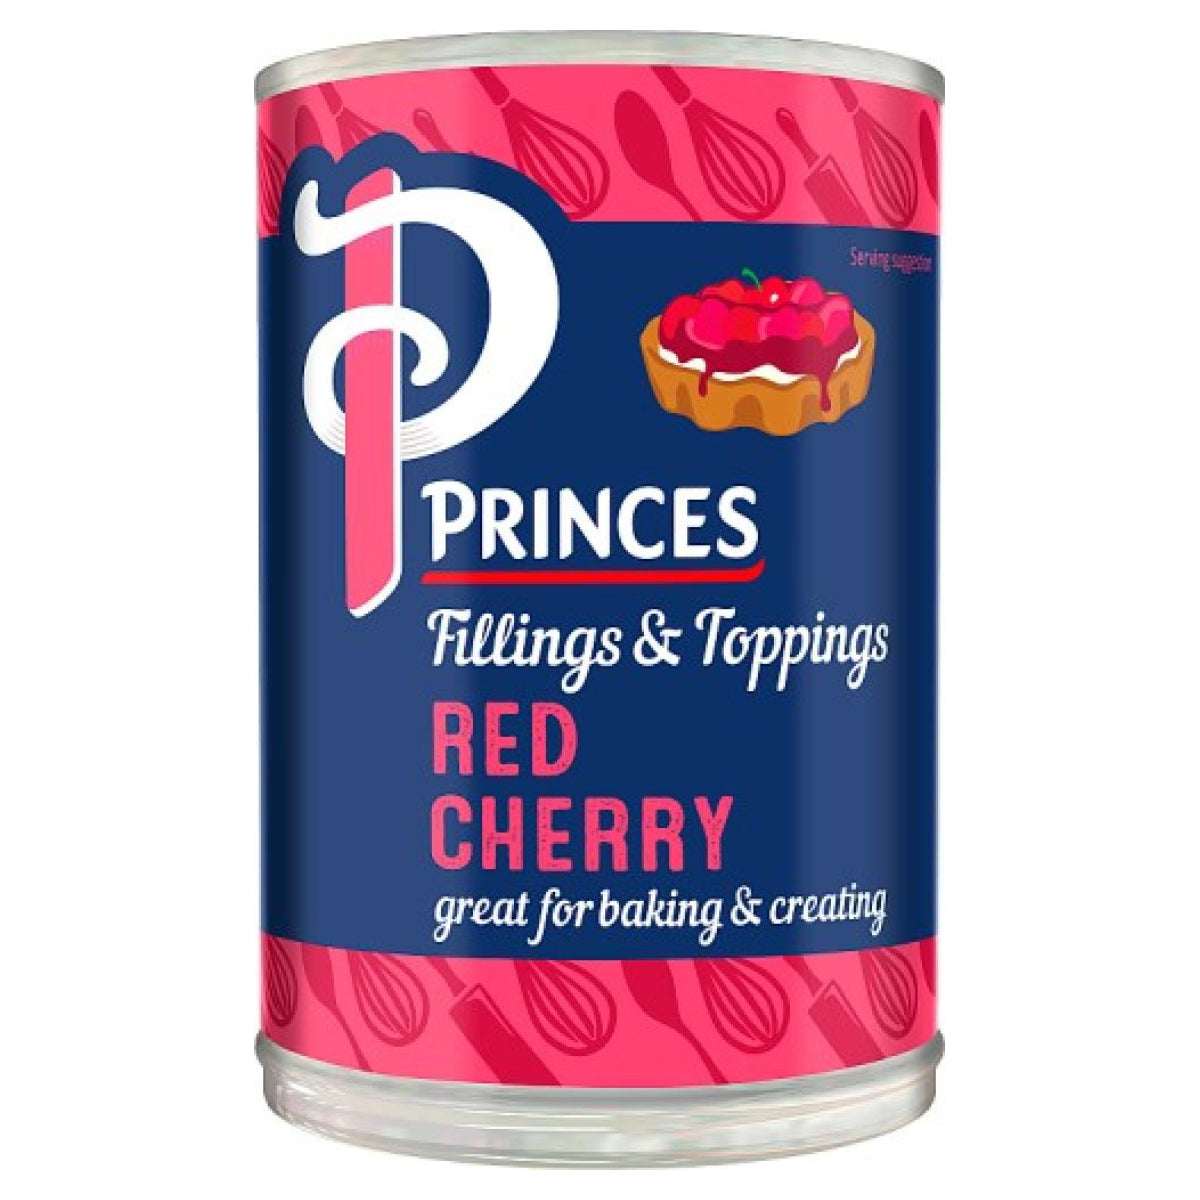 Princes - Fillings and Toppings Red Cherry - 410g - Continental Food Store